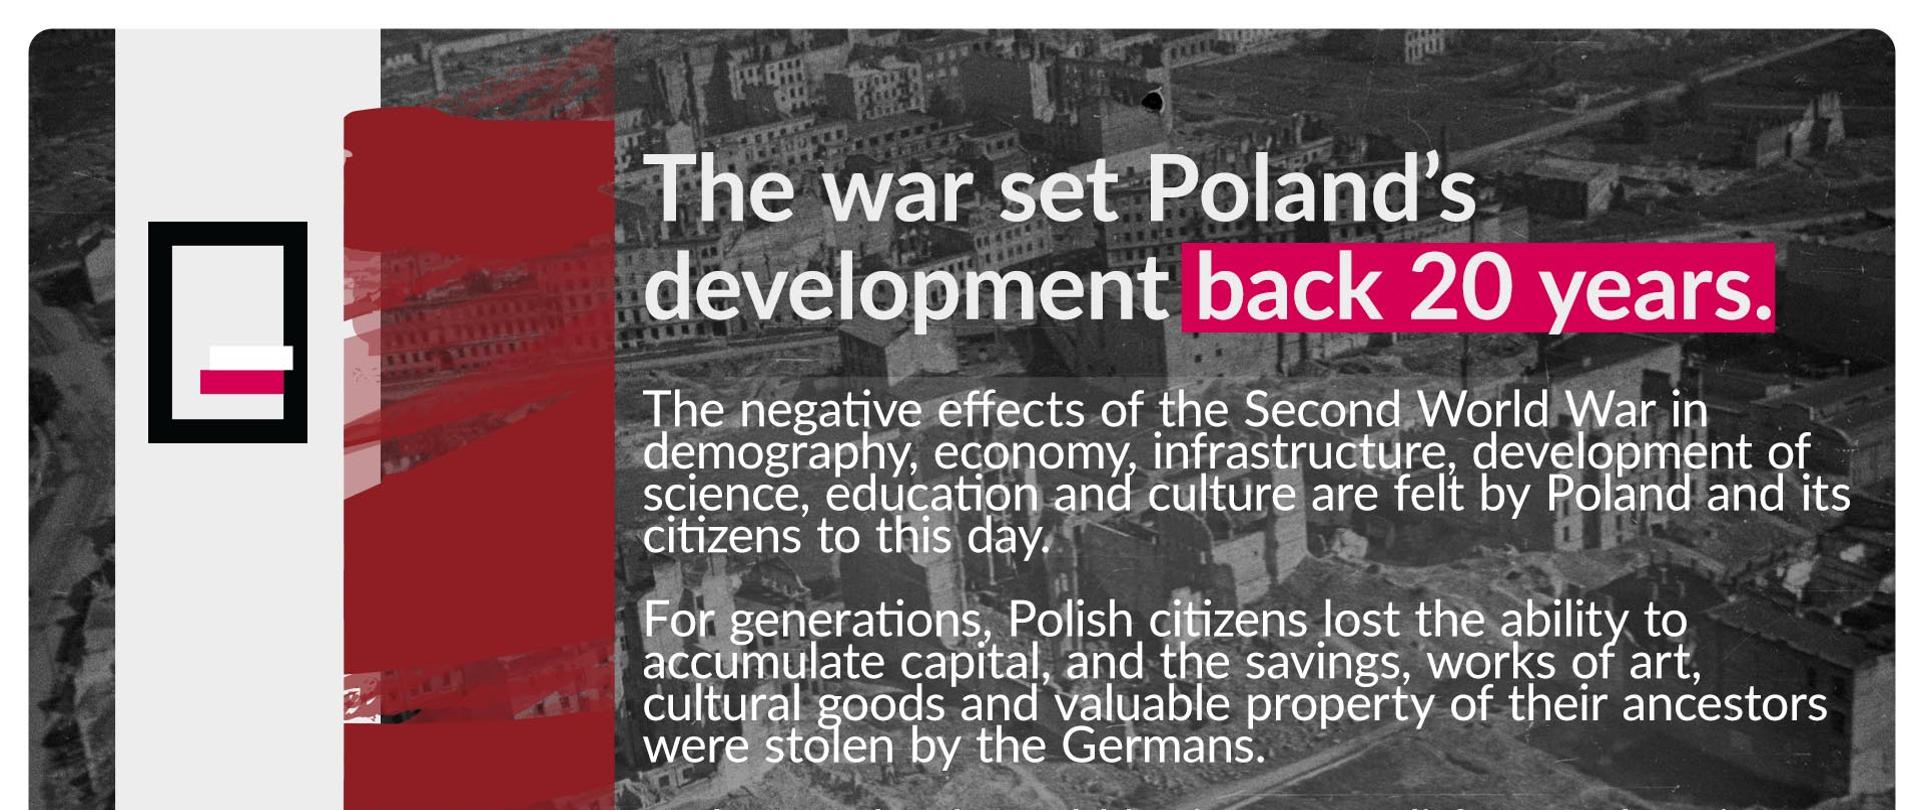 The consequences of II World War for Poland and Polish citizens